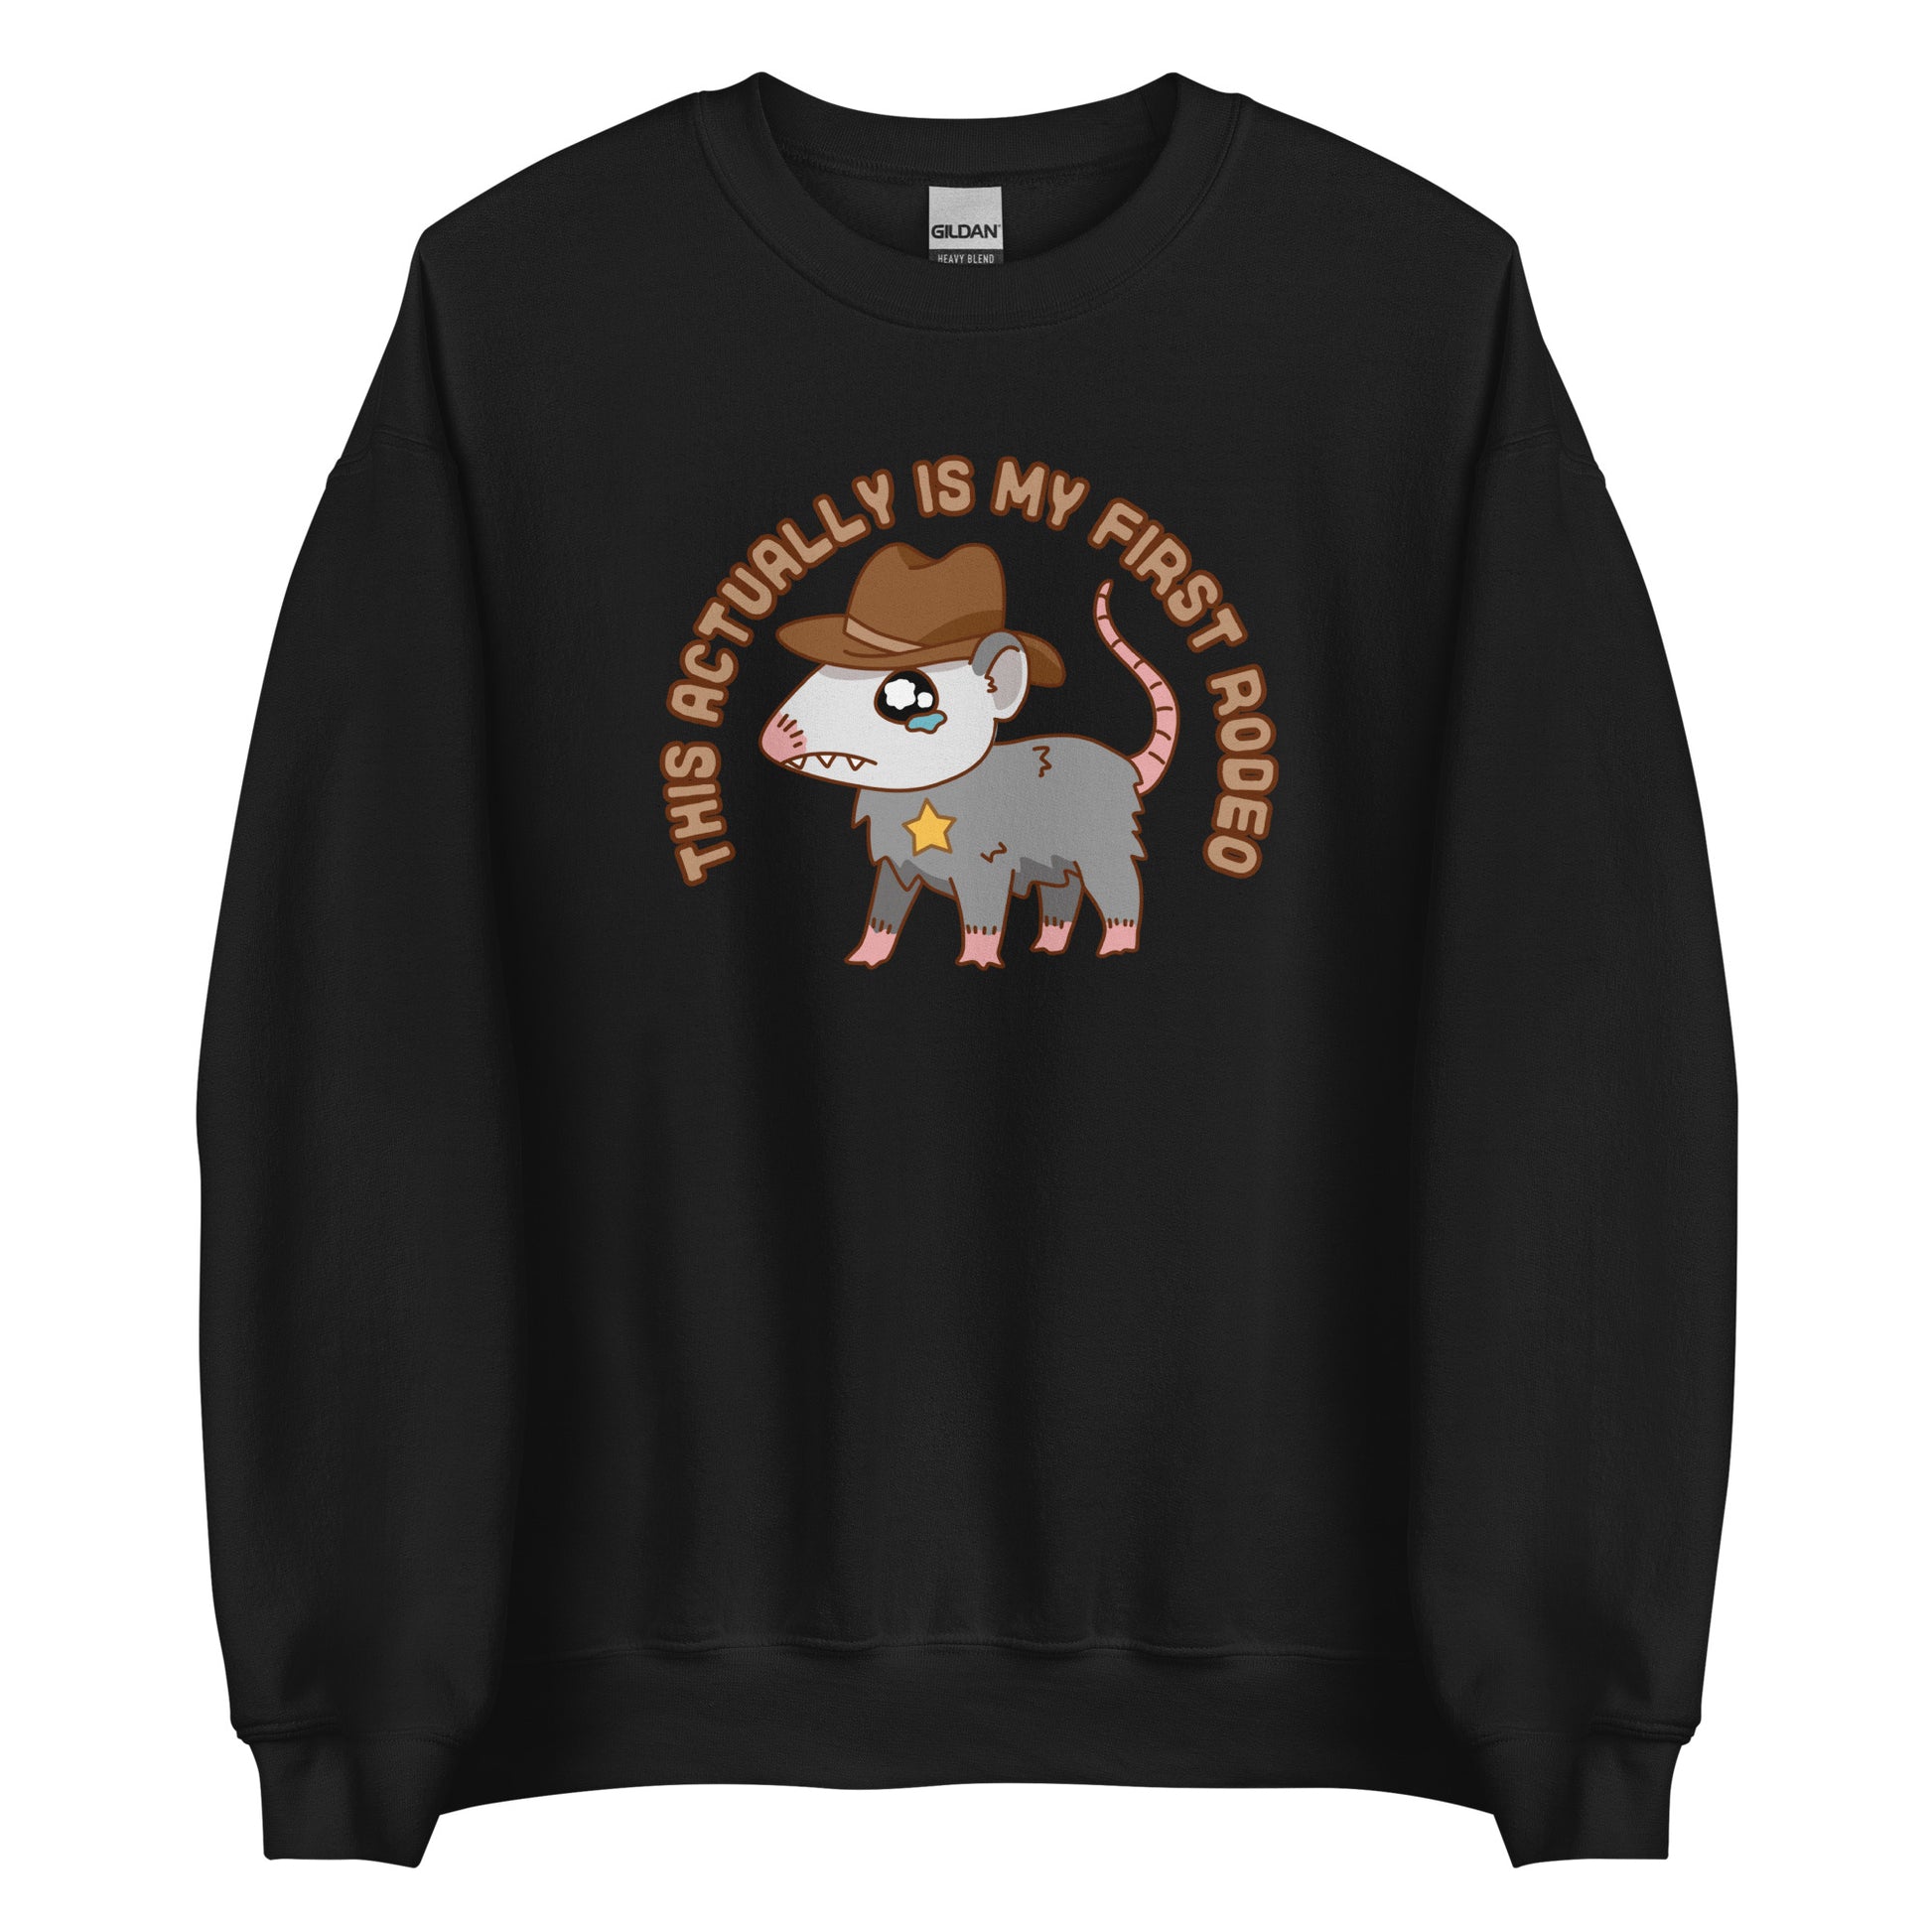 A black crewneck sweatshirt featuring an illustration of a cute and nervous possum wearing a cowboy hat and sherrif's star badge. Text above the possum in an arc reads "this actually is my first rodeo".